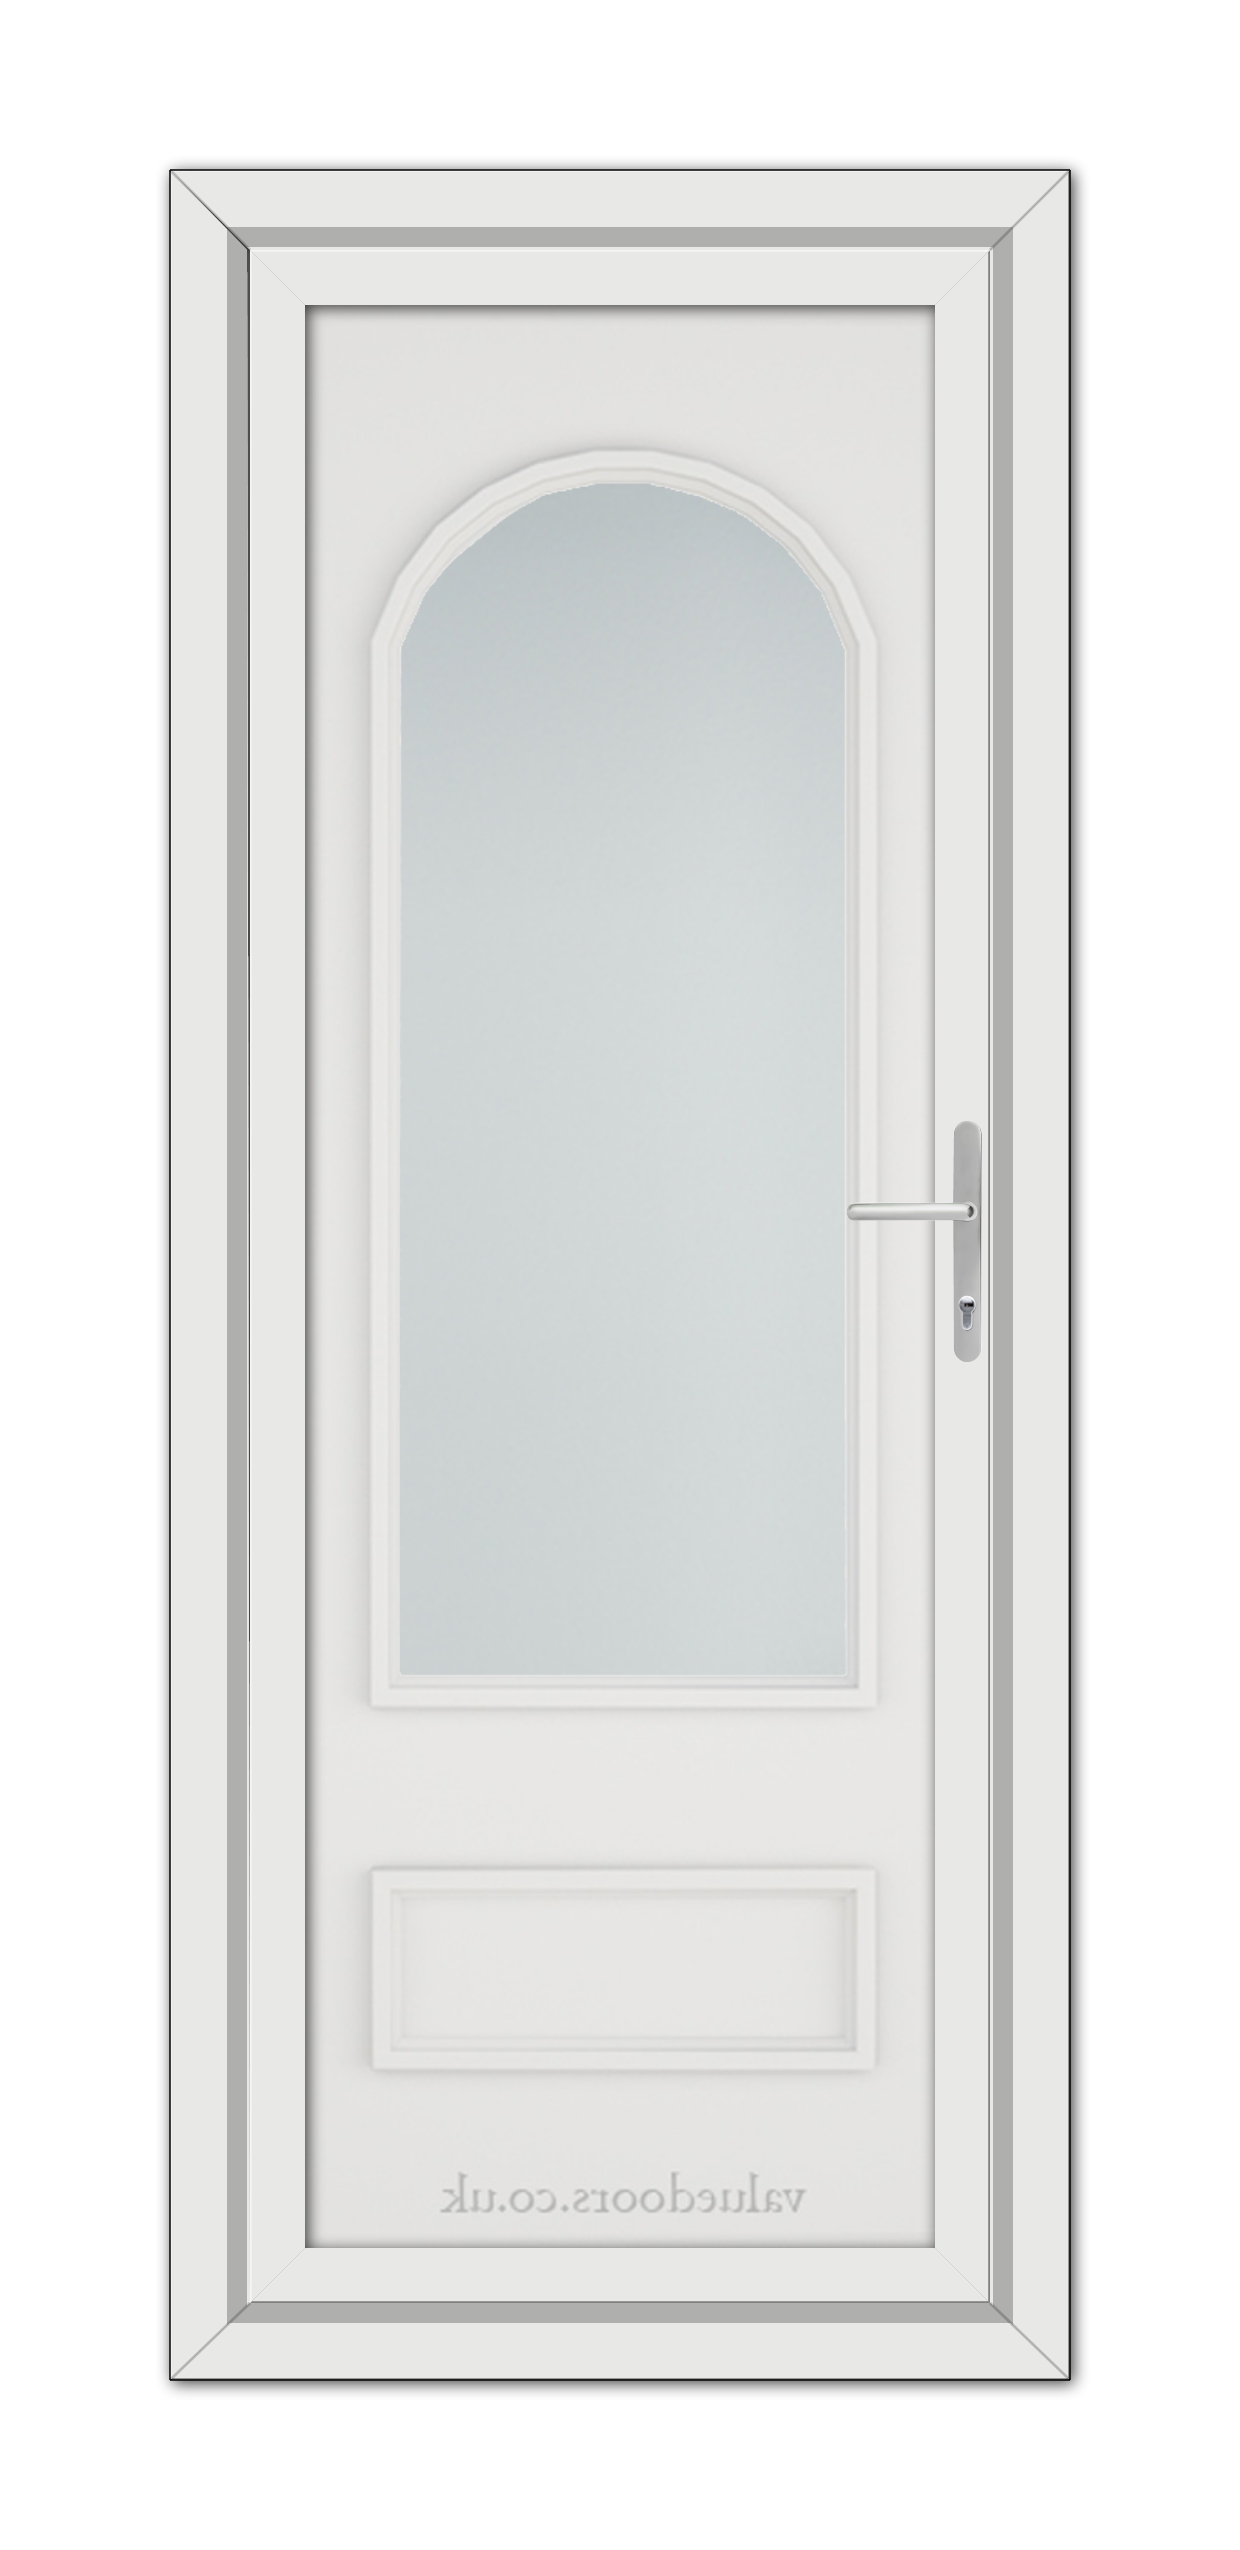 White Canterbury uPVC Door with an arched window and a metallic handle, set in a frame, viewed from the front.